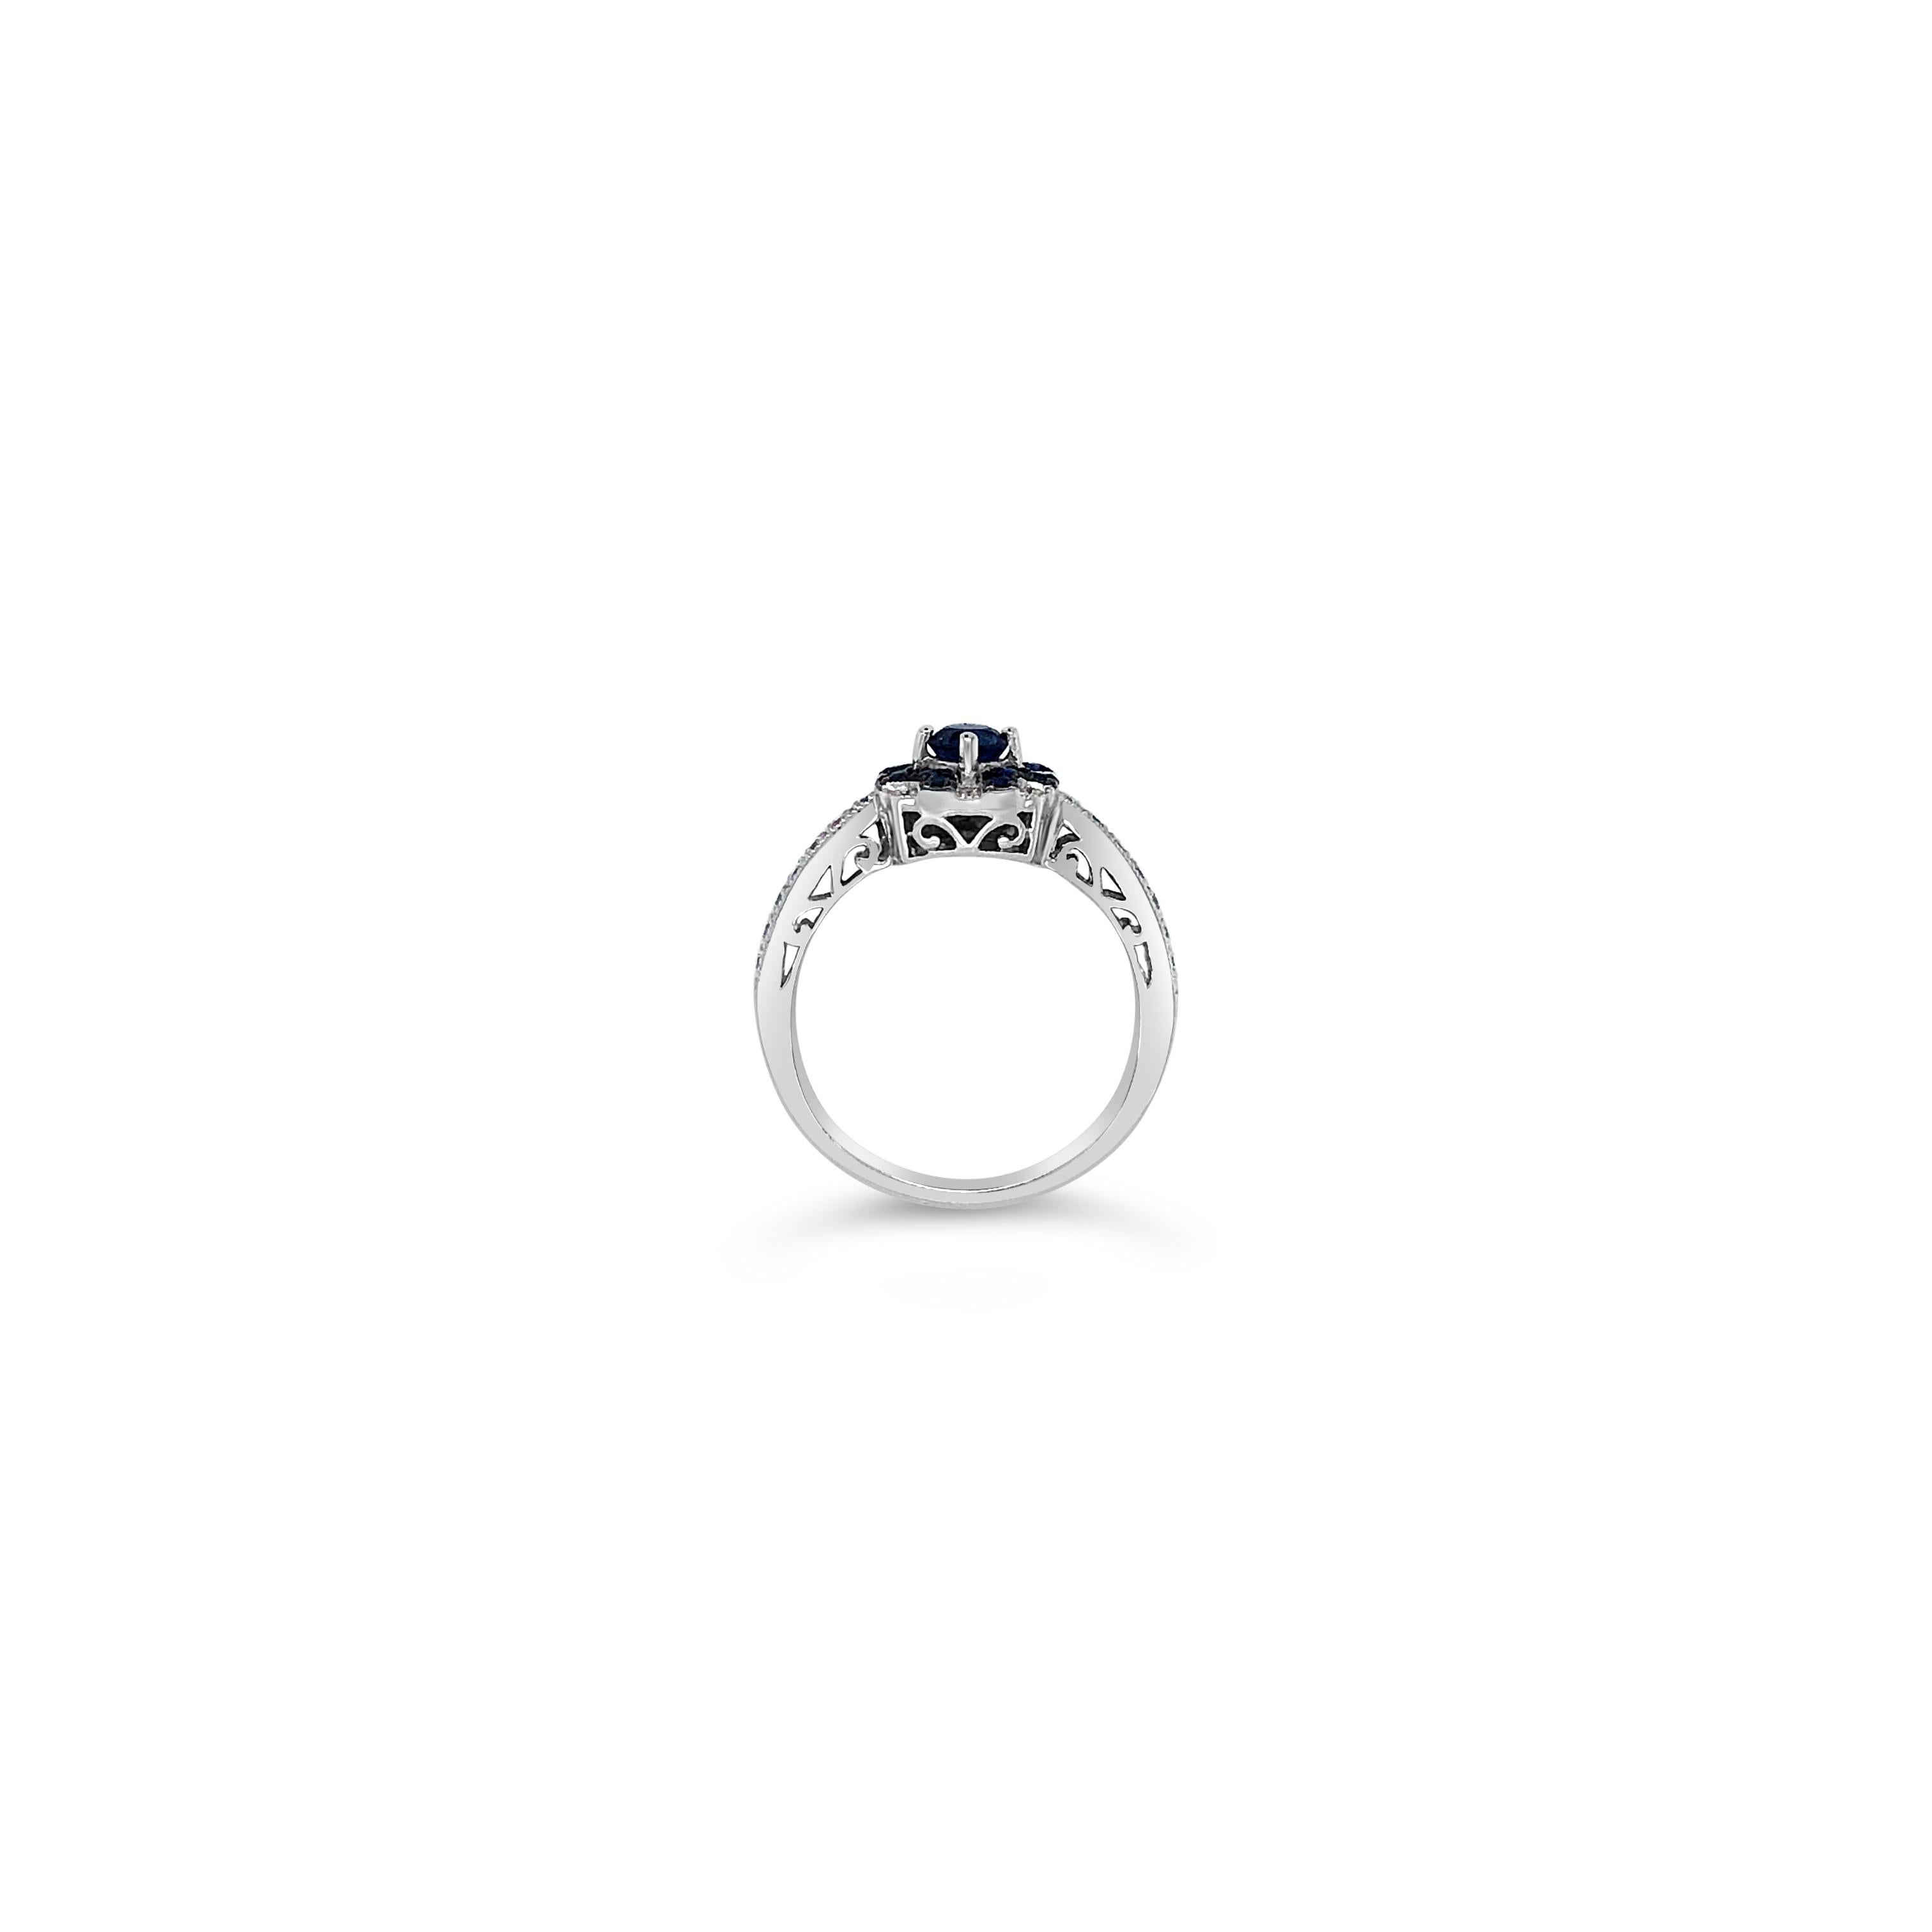 Le Vian® Ring featuring 3/8 cts. Blueberry Sapphire™, 1/5 cts. Vanilla Diamonds®  set in 14K Vanilla Gold®
